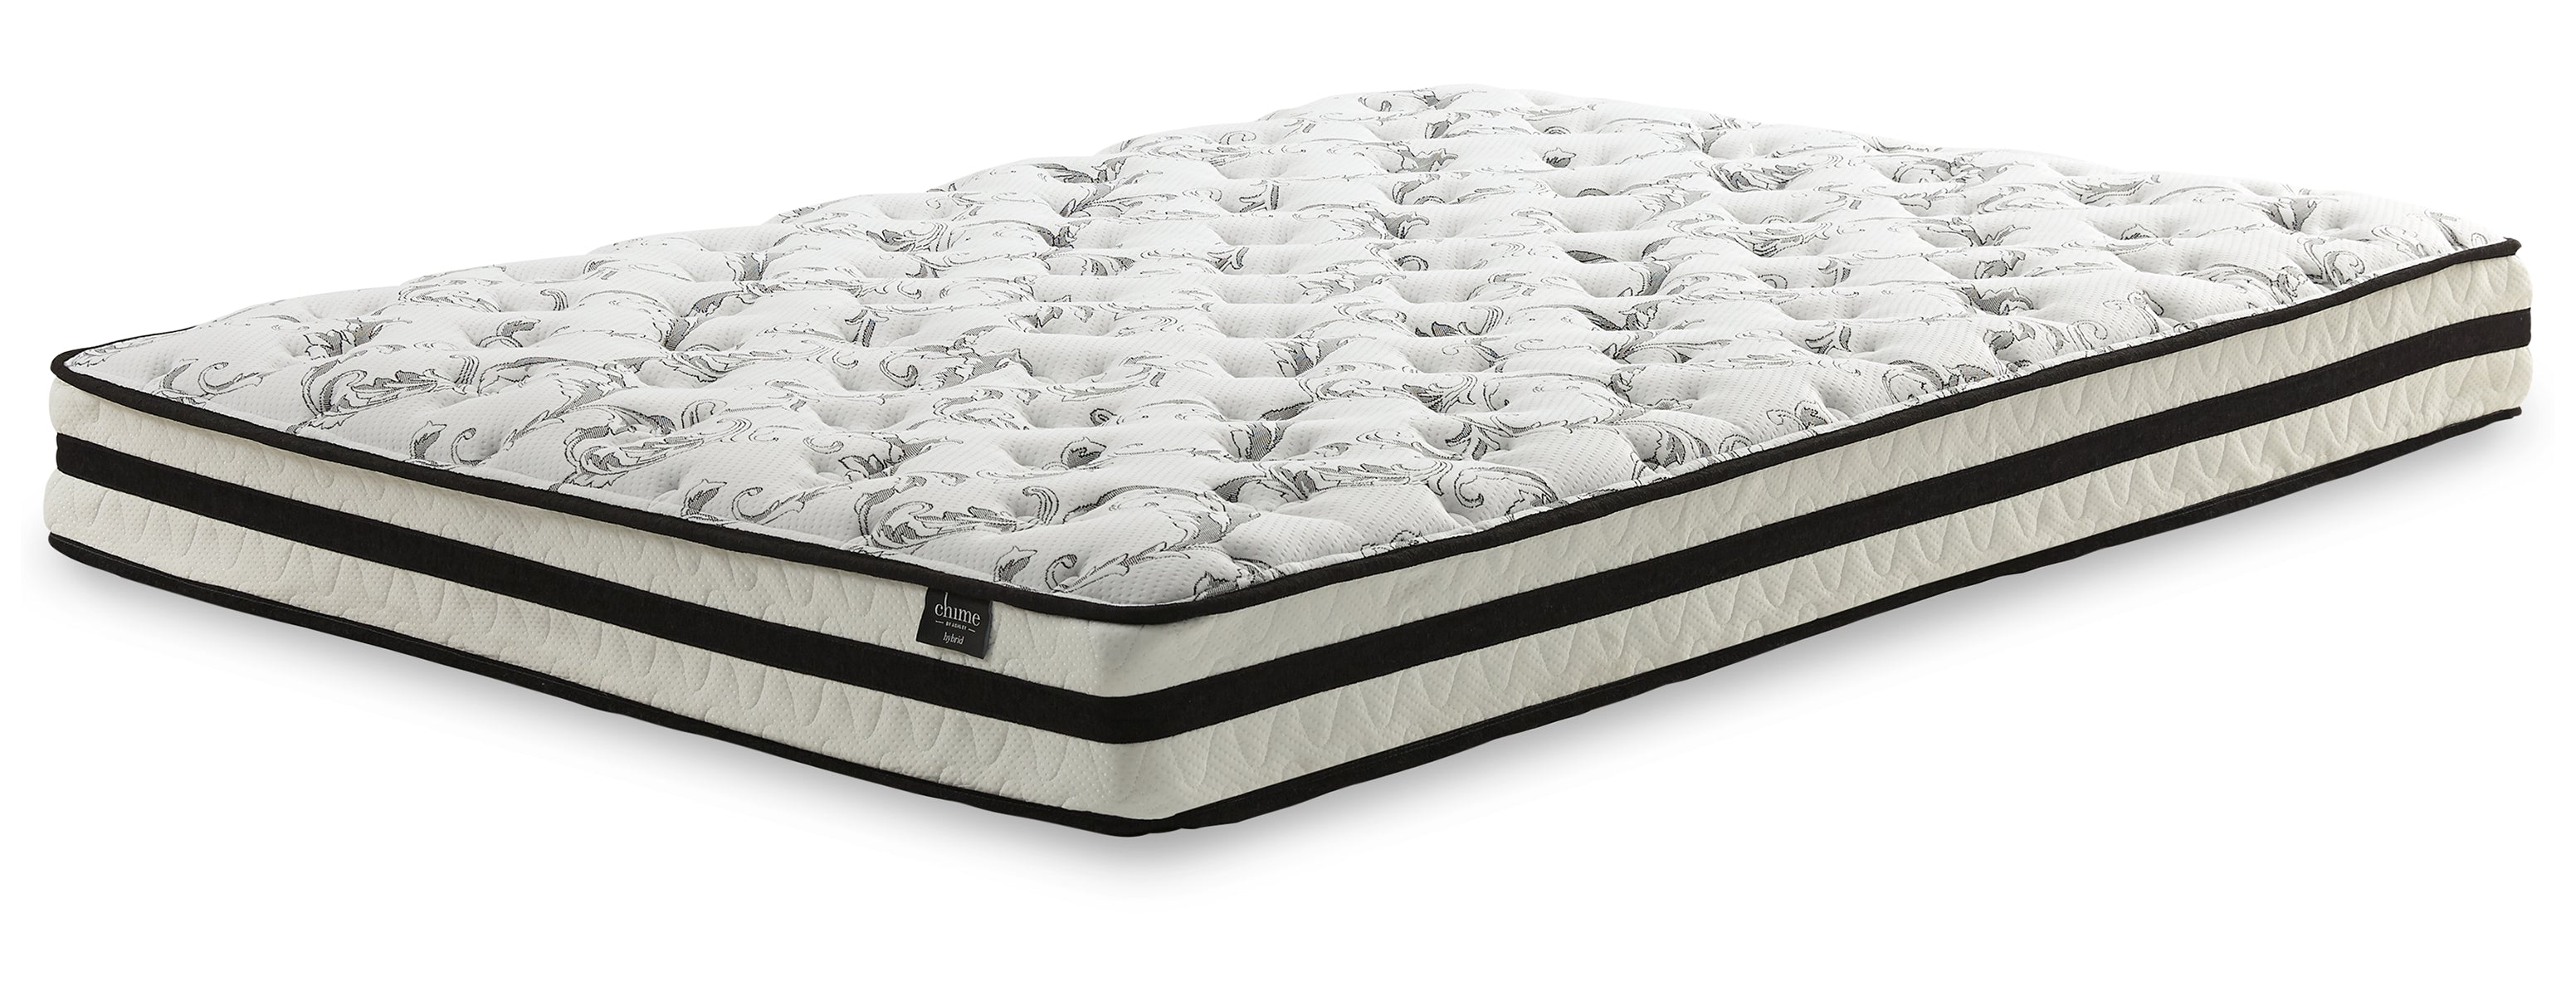 8 Inch Chime Innerspring Mattress with Adjustable Base